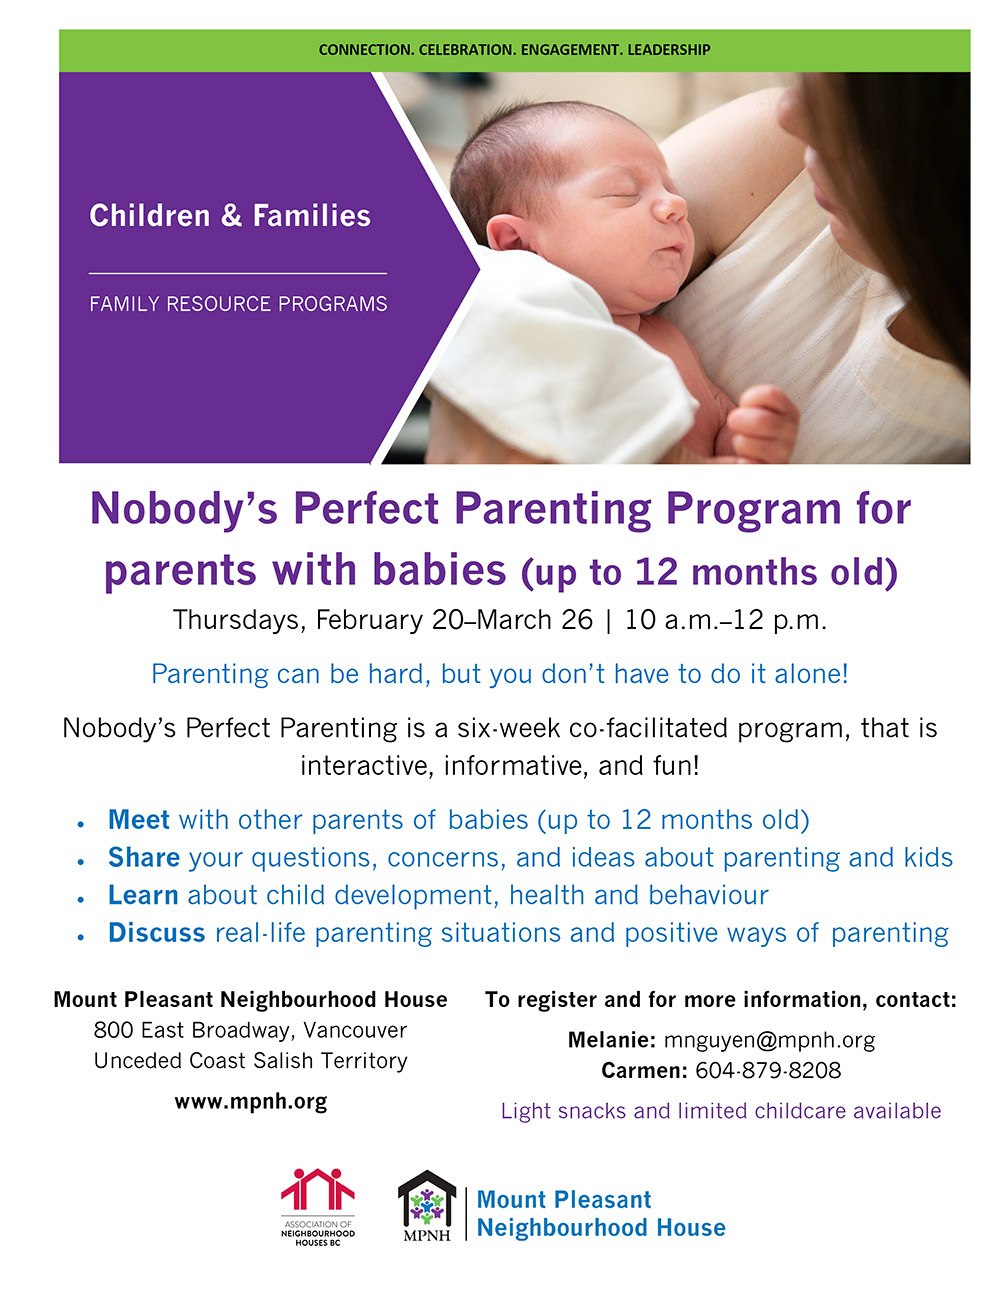 Poster for the Nobody's Perfect Parenting program showing a baby sleeping